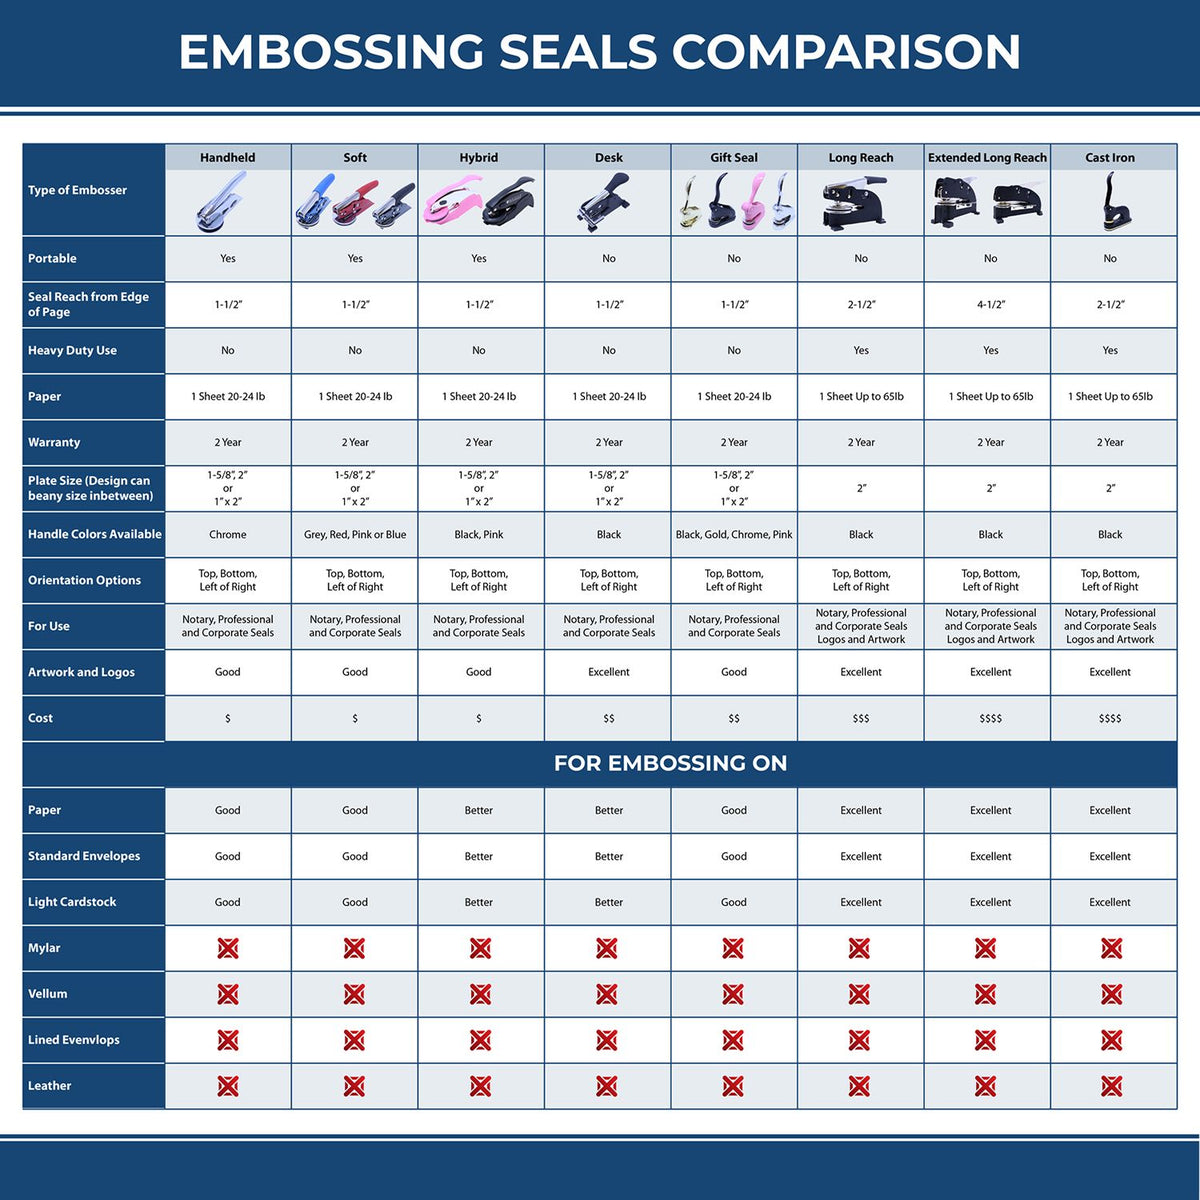 A comparison chart for the different types of mount models available for the Long Reach Colorado Geology Seal